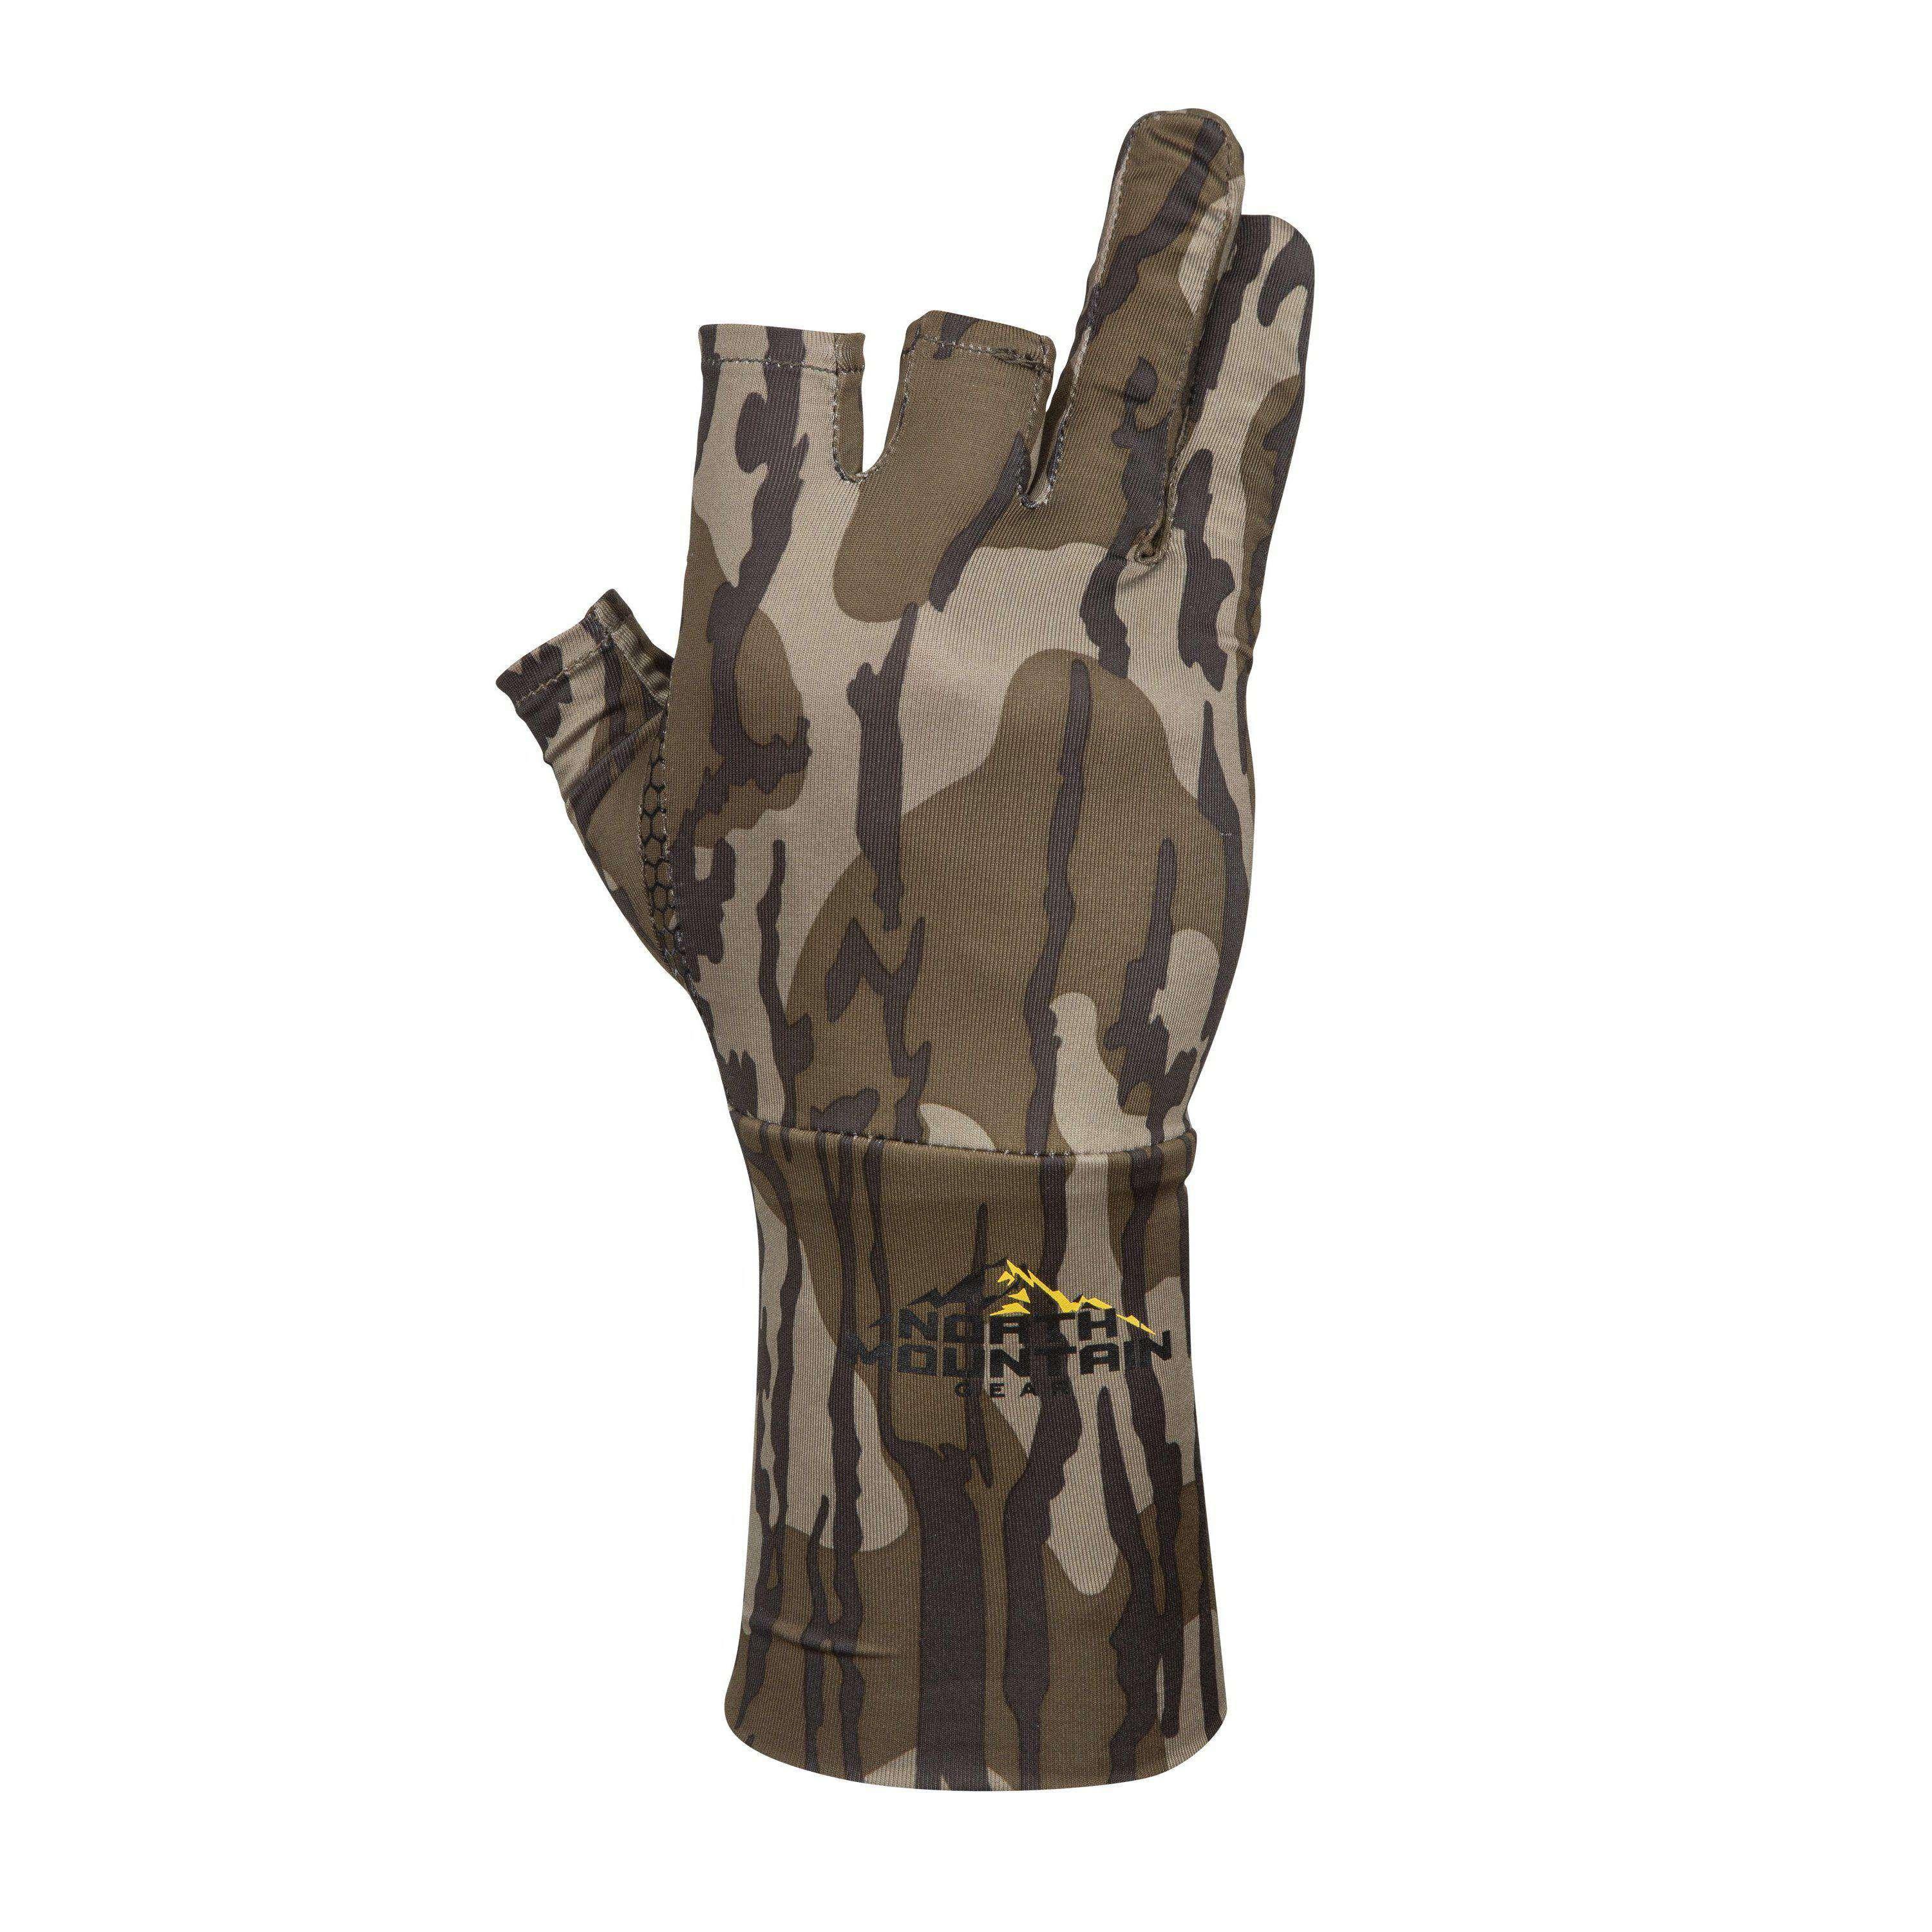 North Mountain Gear's - Mossy Oak Bottomland Camo Stretch Fit Gloves